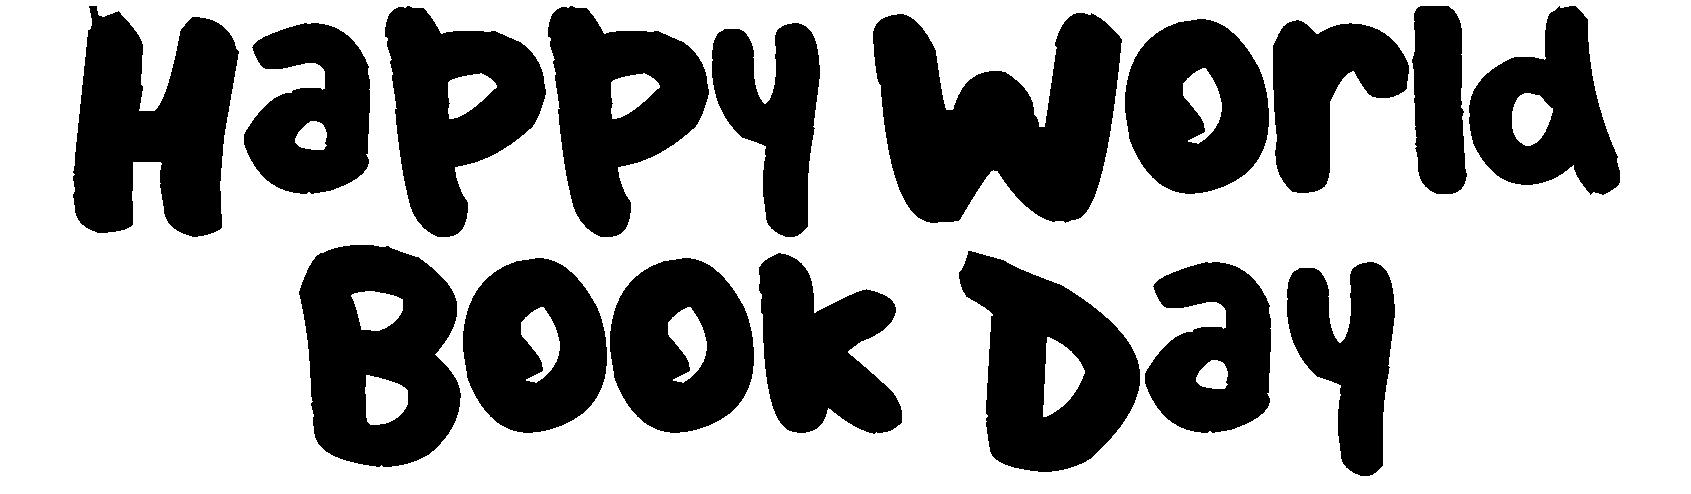 Happy World Book Day Black Text Isolated On White Background